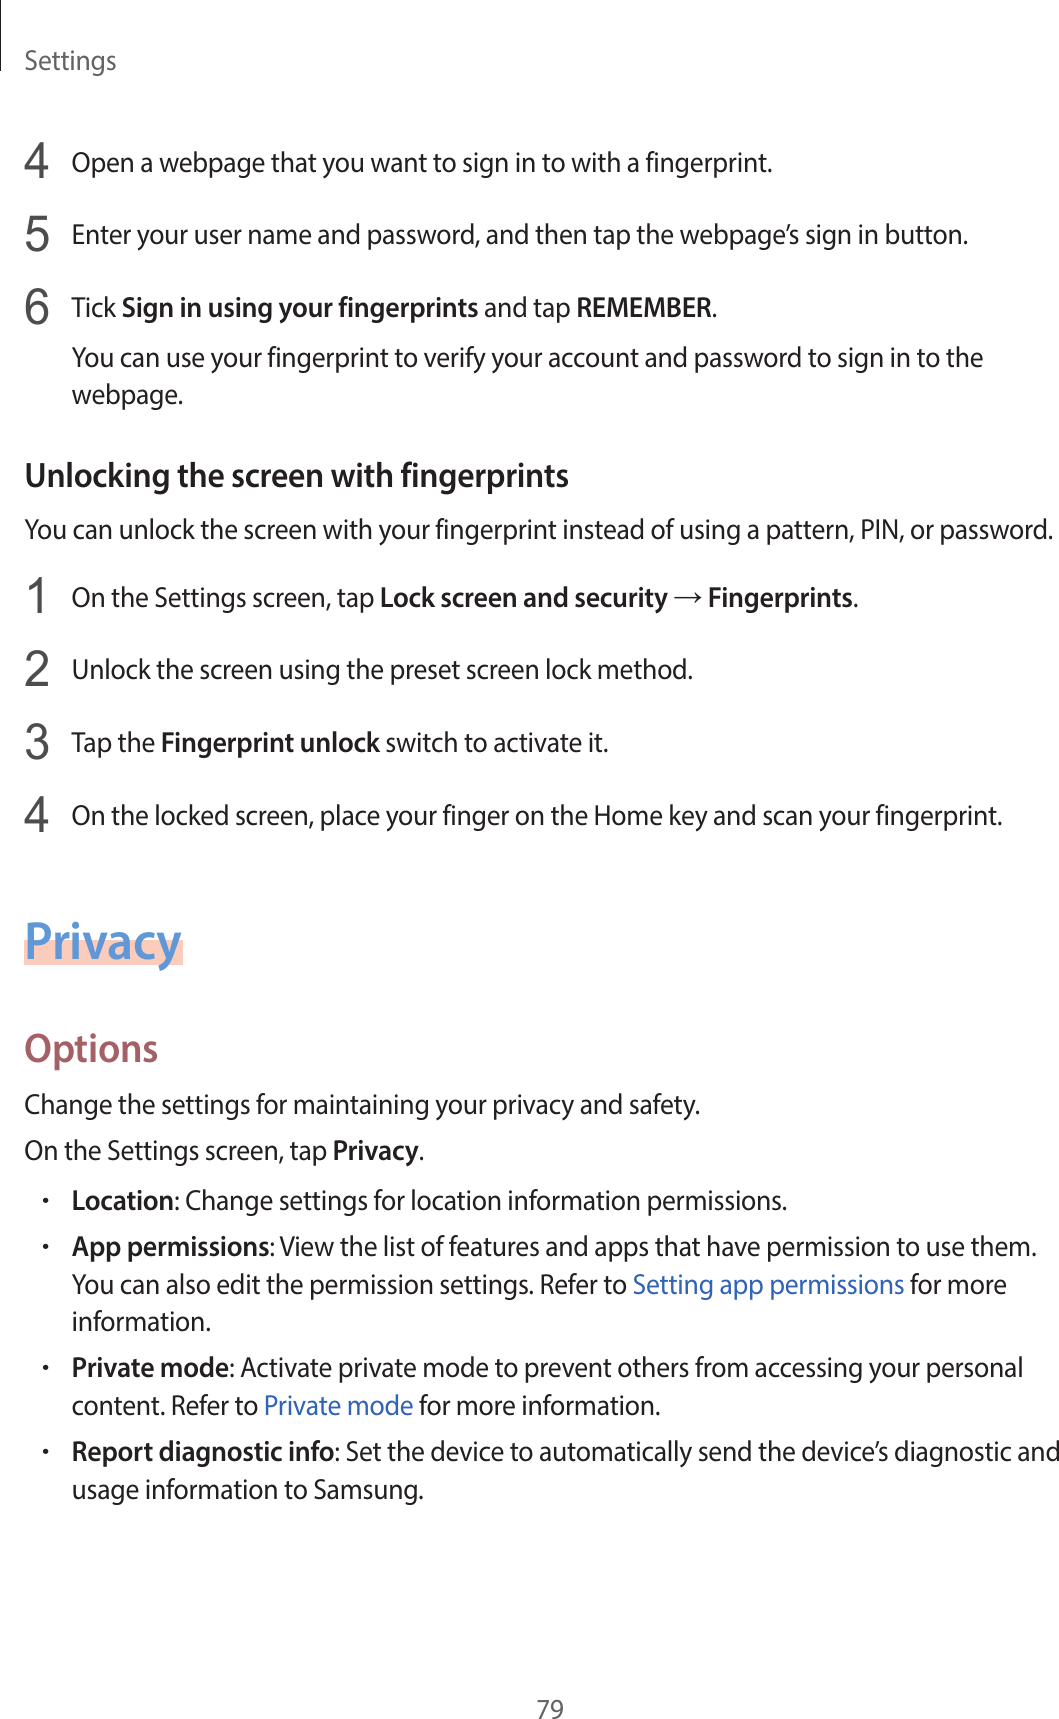 Settings794  Open a webpage that you want to sign in to with a fingerprint.5  Enter your user name and password, and then tap the webpage’s sign in button.6  Tick Sign in using your fingerprints and tap REMEMBER.You can use your fingerprint to verify your account and password to sign in to the webpage.Unlocking the screen with fingerprintsYou can unlock the screen with your fingerprint instead of using a pattern, PIN, or password.1  On the Settings screen, tap Lock screen and security → Fingerprints.2  Unlock the screen using the preset screen lock method.3  Tap the Fingerprint unlock switch to activate it.4  On the locked screen, place your finger on the Home key and scan your fingerprint.PrivacyOptionsChange the settings for maintaining your privacy and safety.On the Settings screen, tap Privacy.•Location: Change settings for location information permissions.•App permissions: View the list of features and apps that have permission to use them. You can also edit the permission settings. Refer to Setting app permissions for more information.•Private mode: Activate private mode to prevent others from accessing your personal content. Refer to Private mode for more information.•Report diagnostic info: Set the device to automatically send the device’s diagnostic and usage information to Samsung.